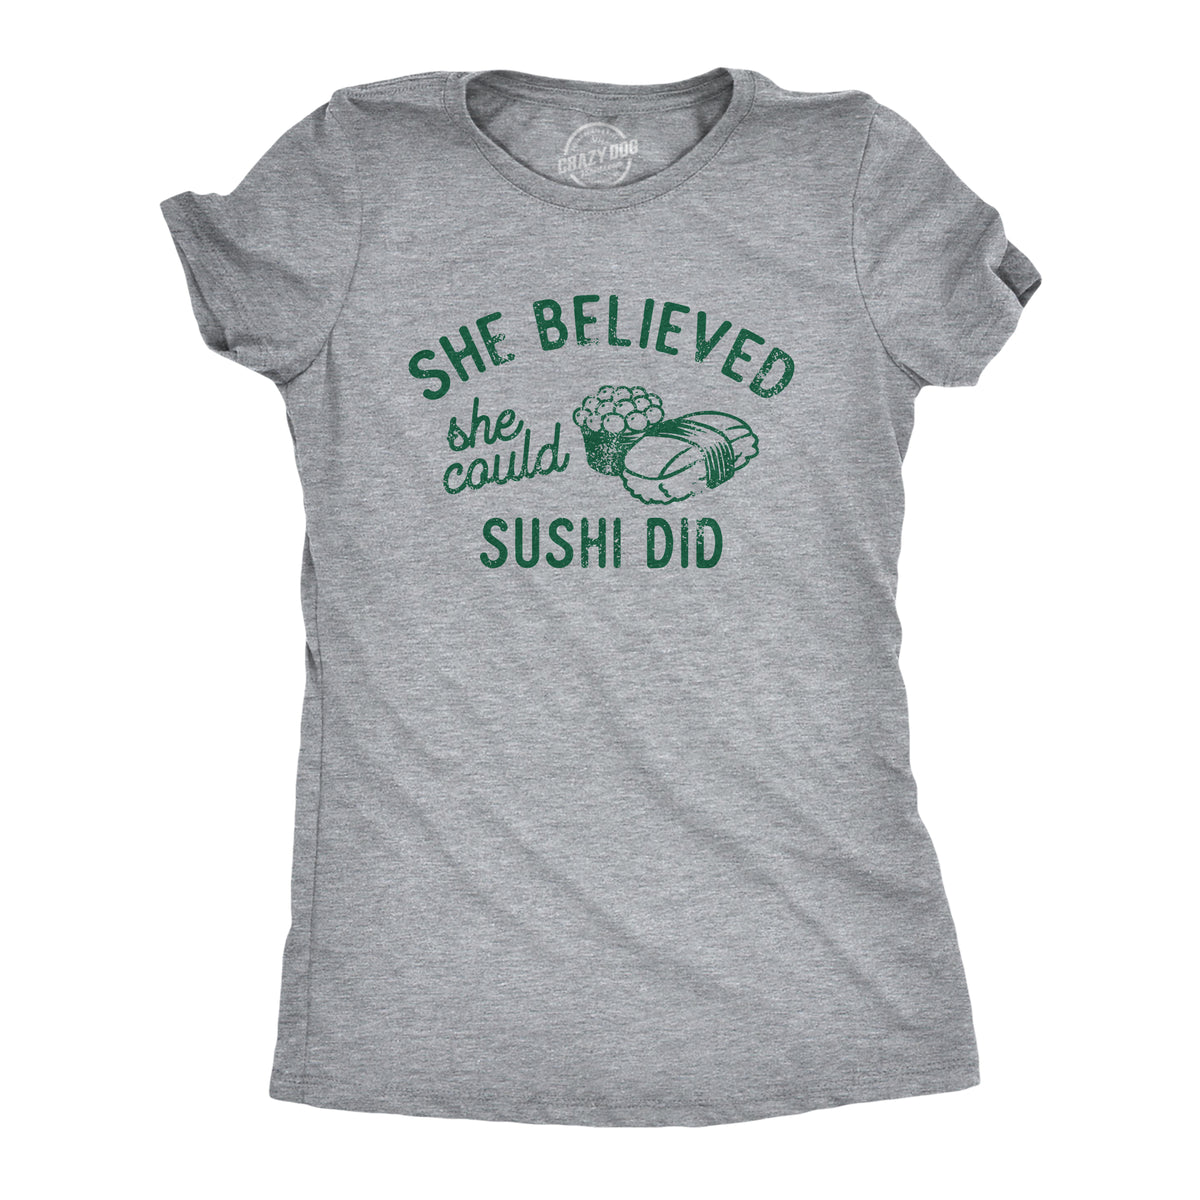 Funny Light Heather Grey - SUSHI She Believed She Could Sushi Did Womens T Shirt Nerdy Food sarcastic Tee